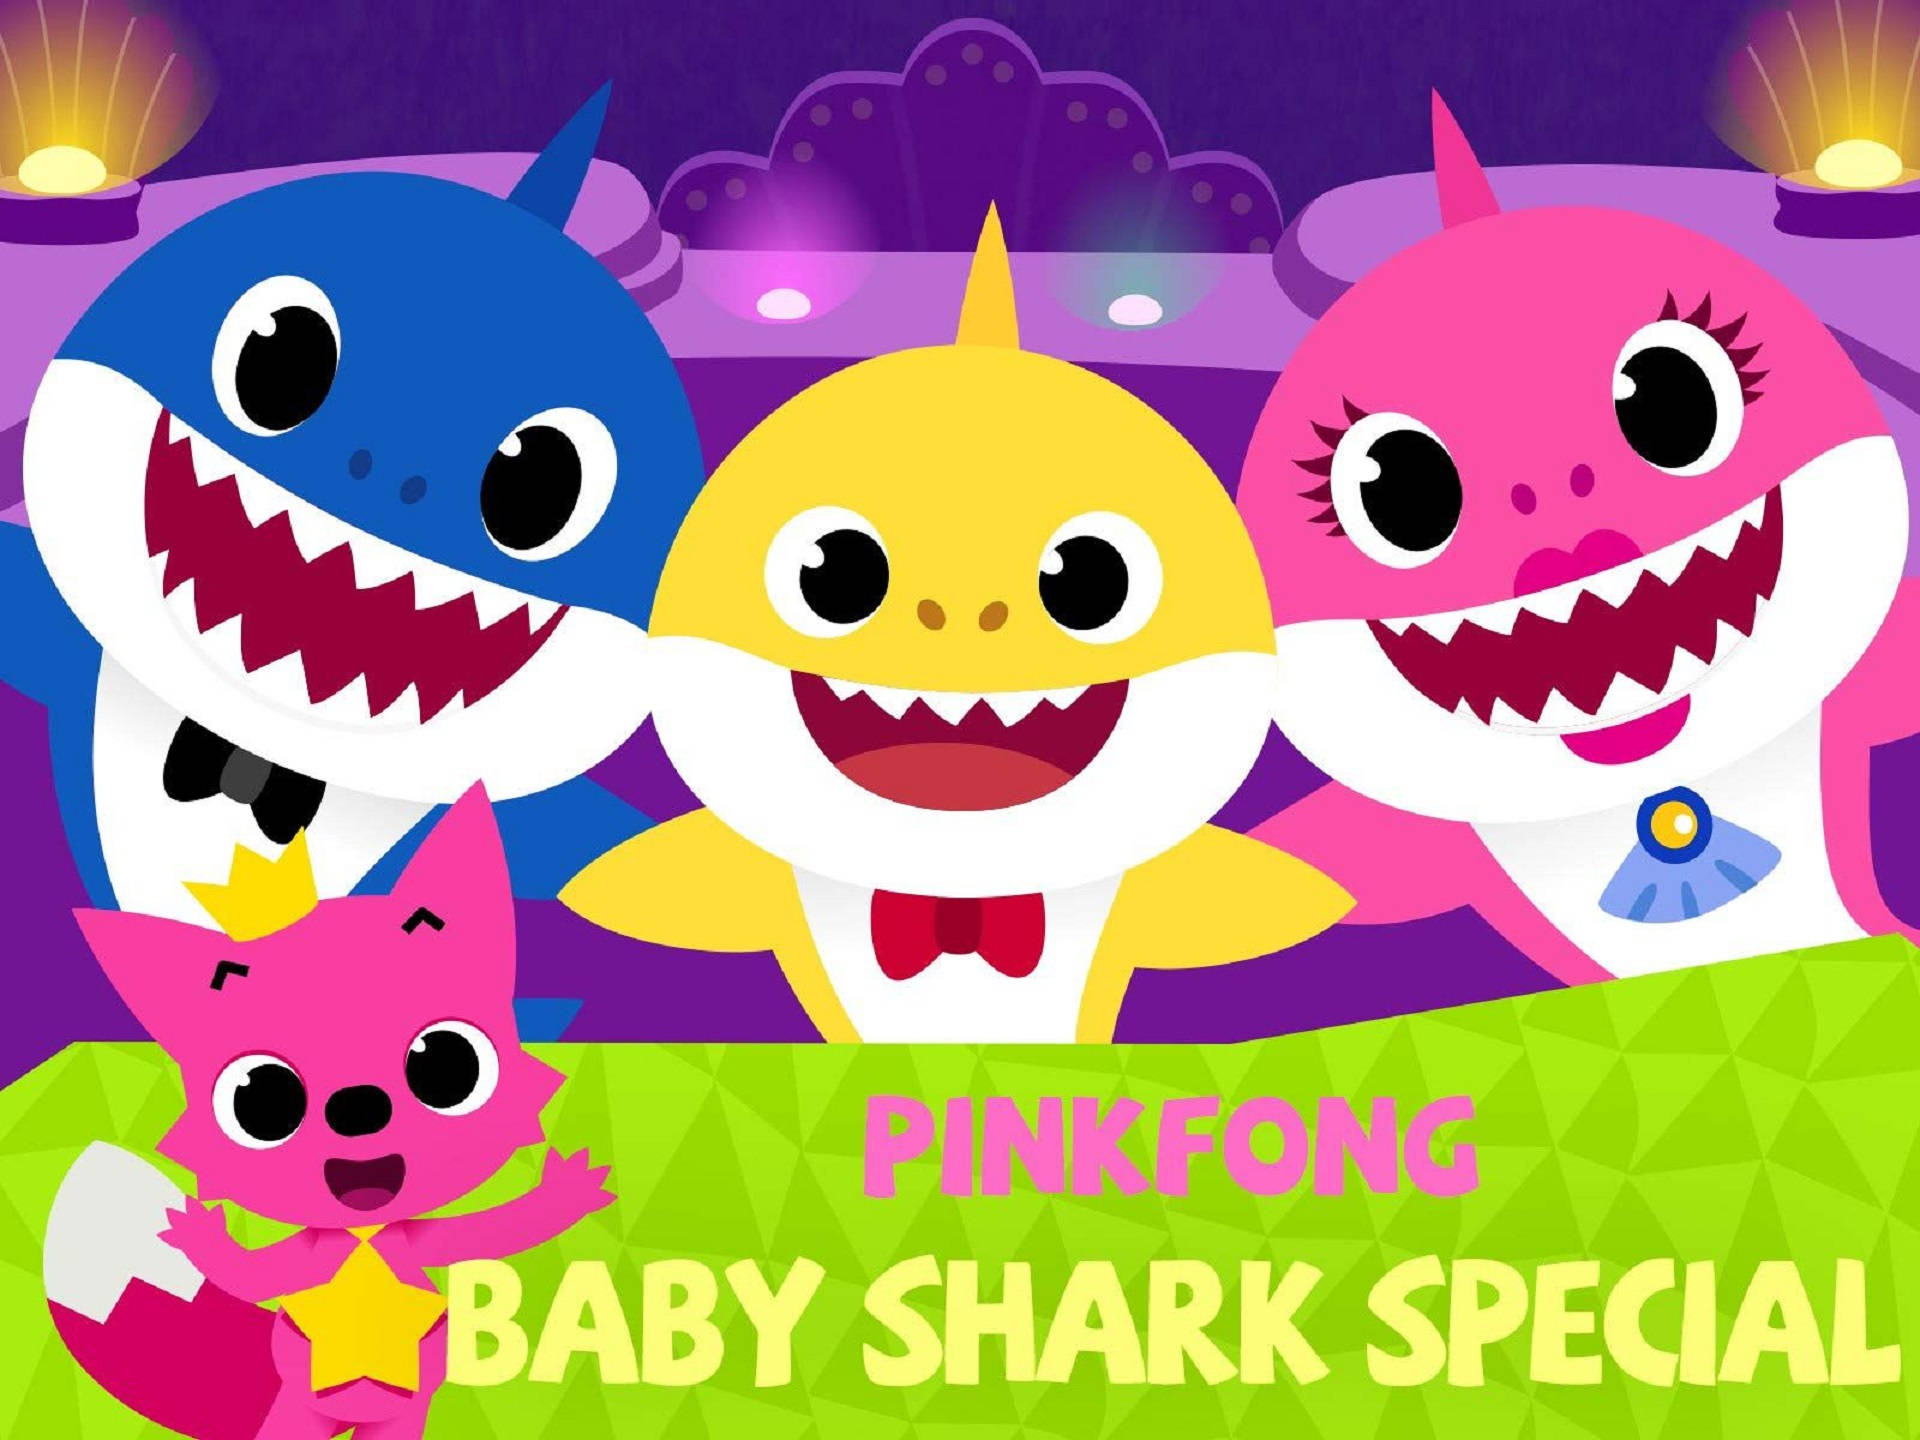 Pinkfong Baby Shark Special Album Background